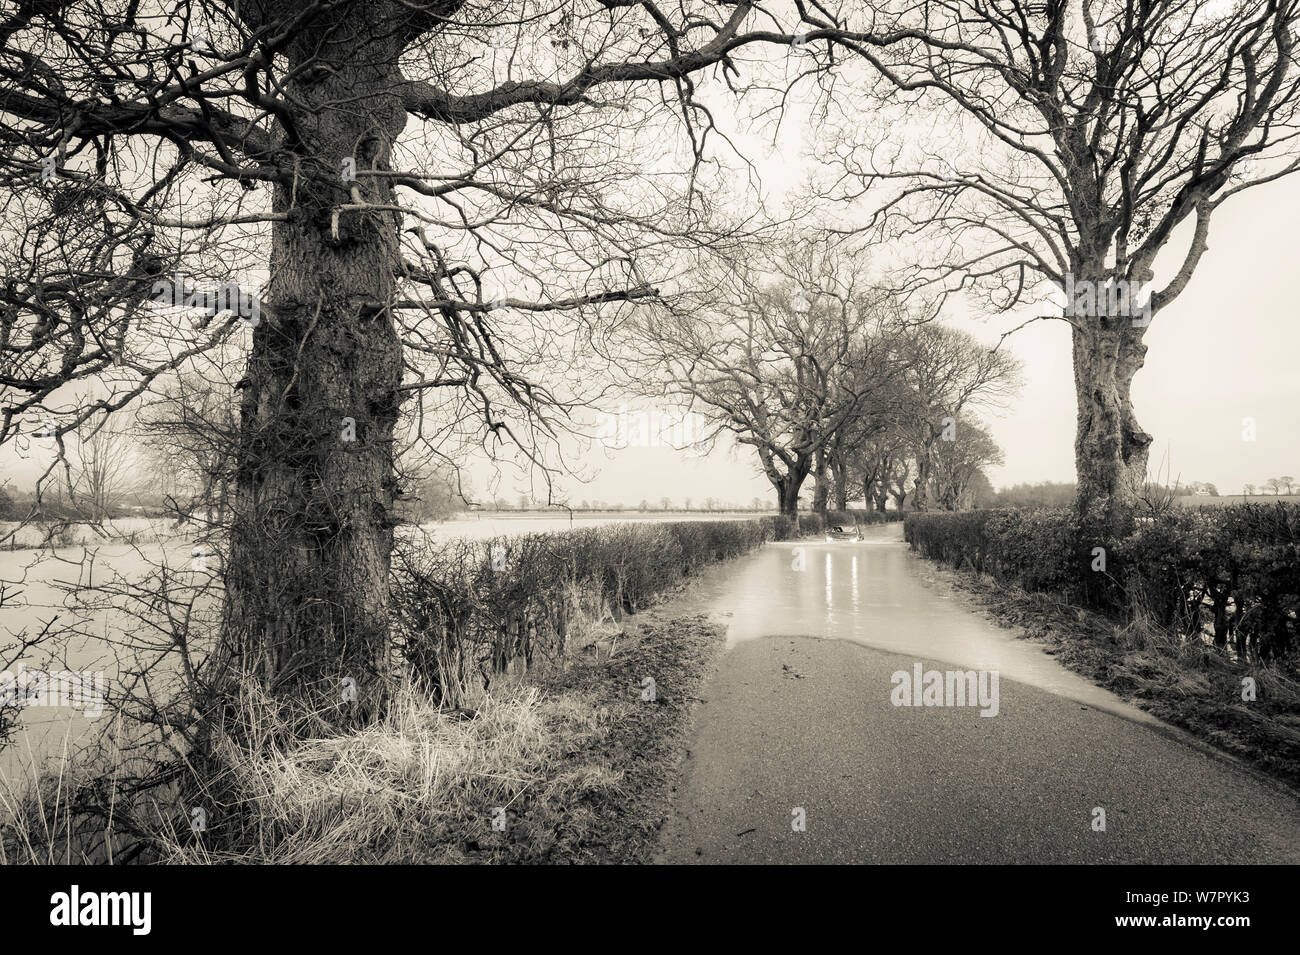 Road leading into the flooding on the River South Esk, Angus, Scotland, 23rd December 2012. Stock Photo